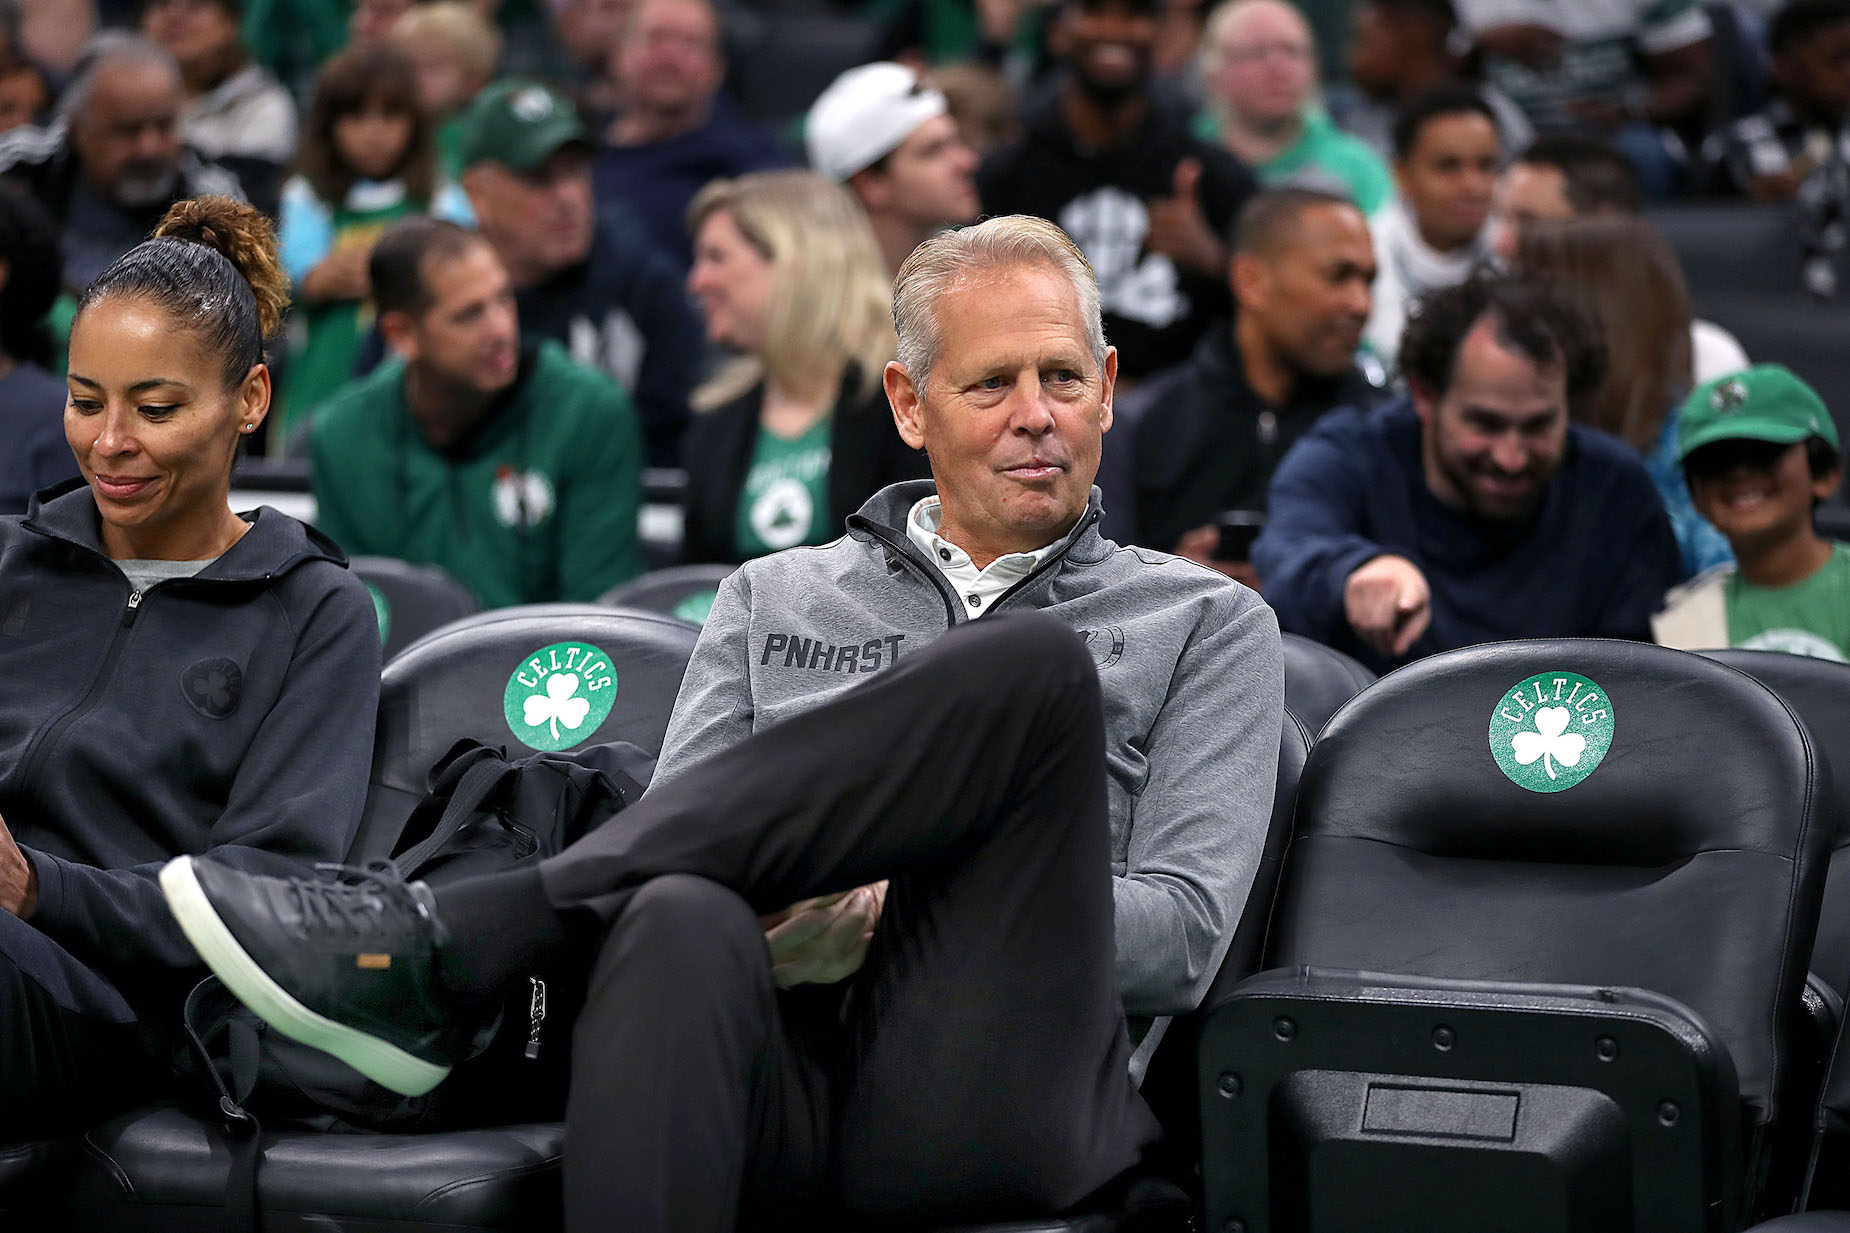 Danny Ainge played for the Boston Celtics before taking charge of the team as a front office executive.